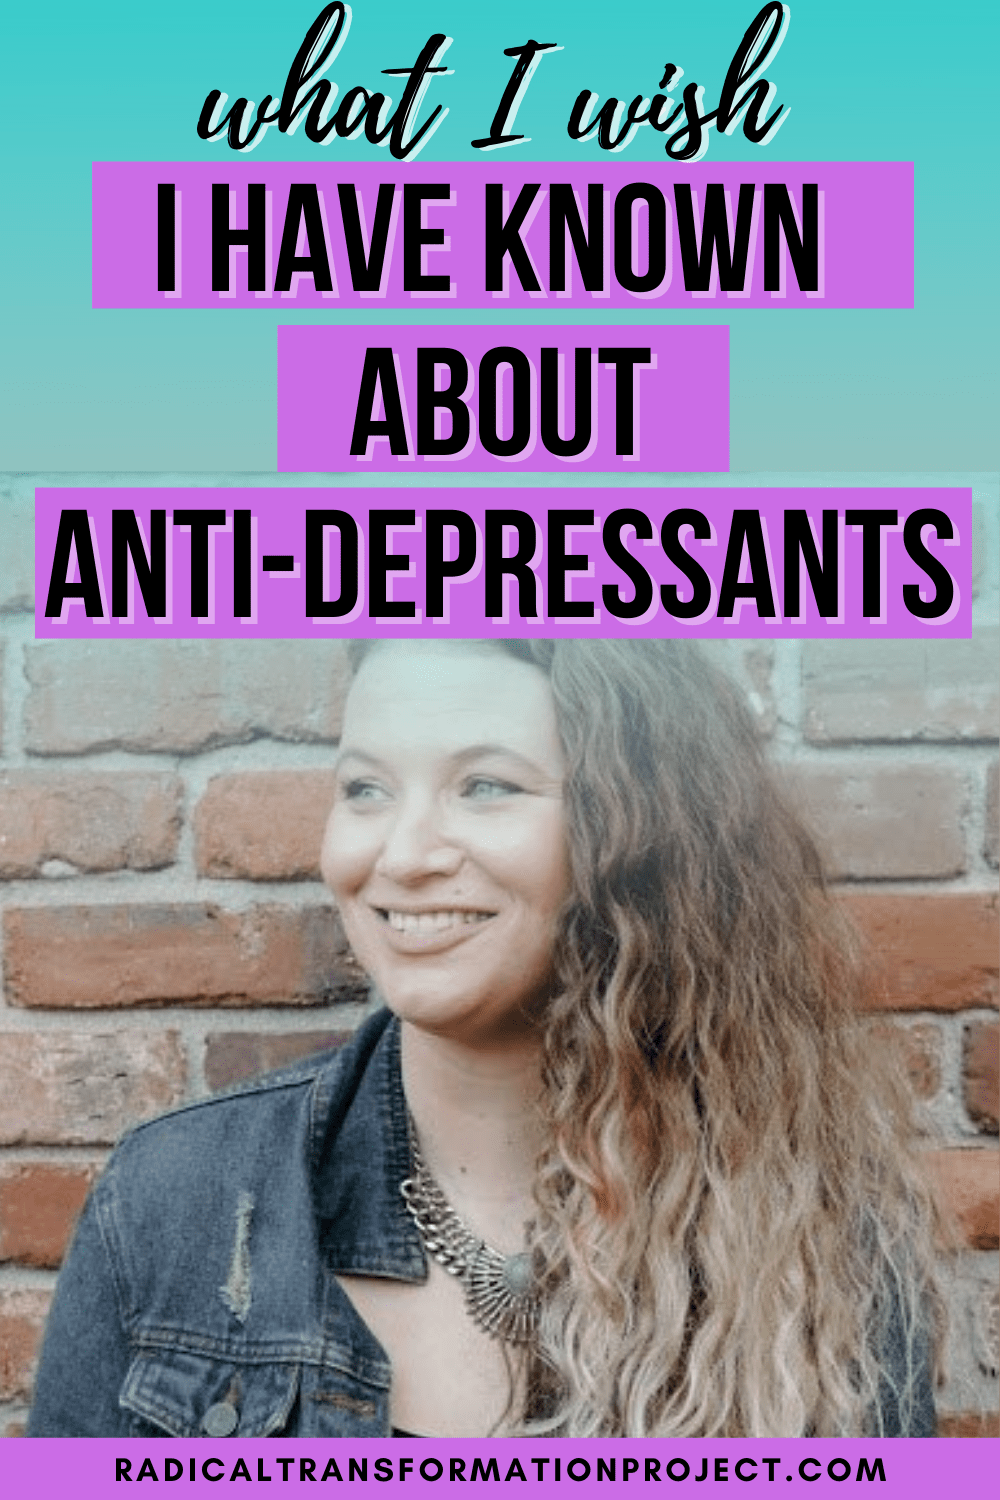 What I Wish I Had Known About Anti-Depressants